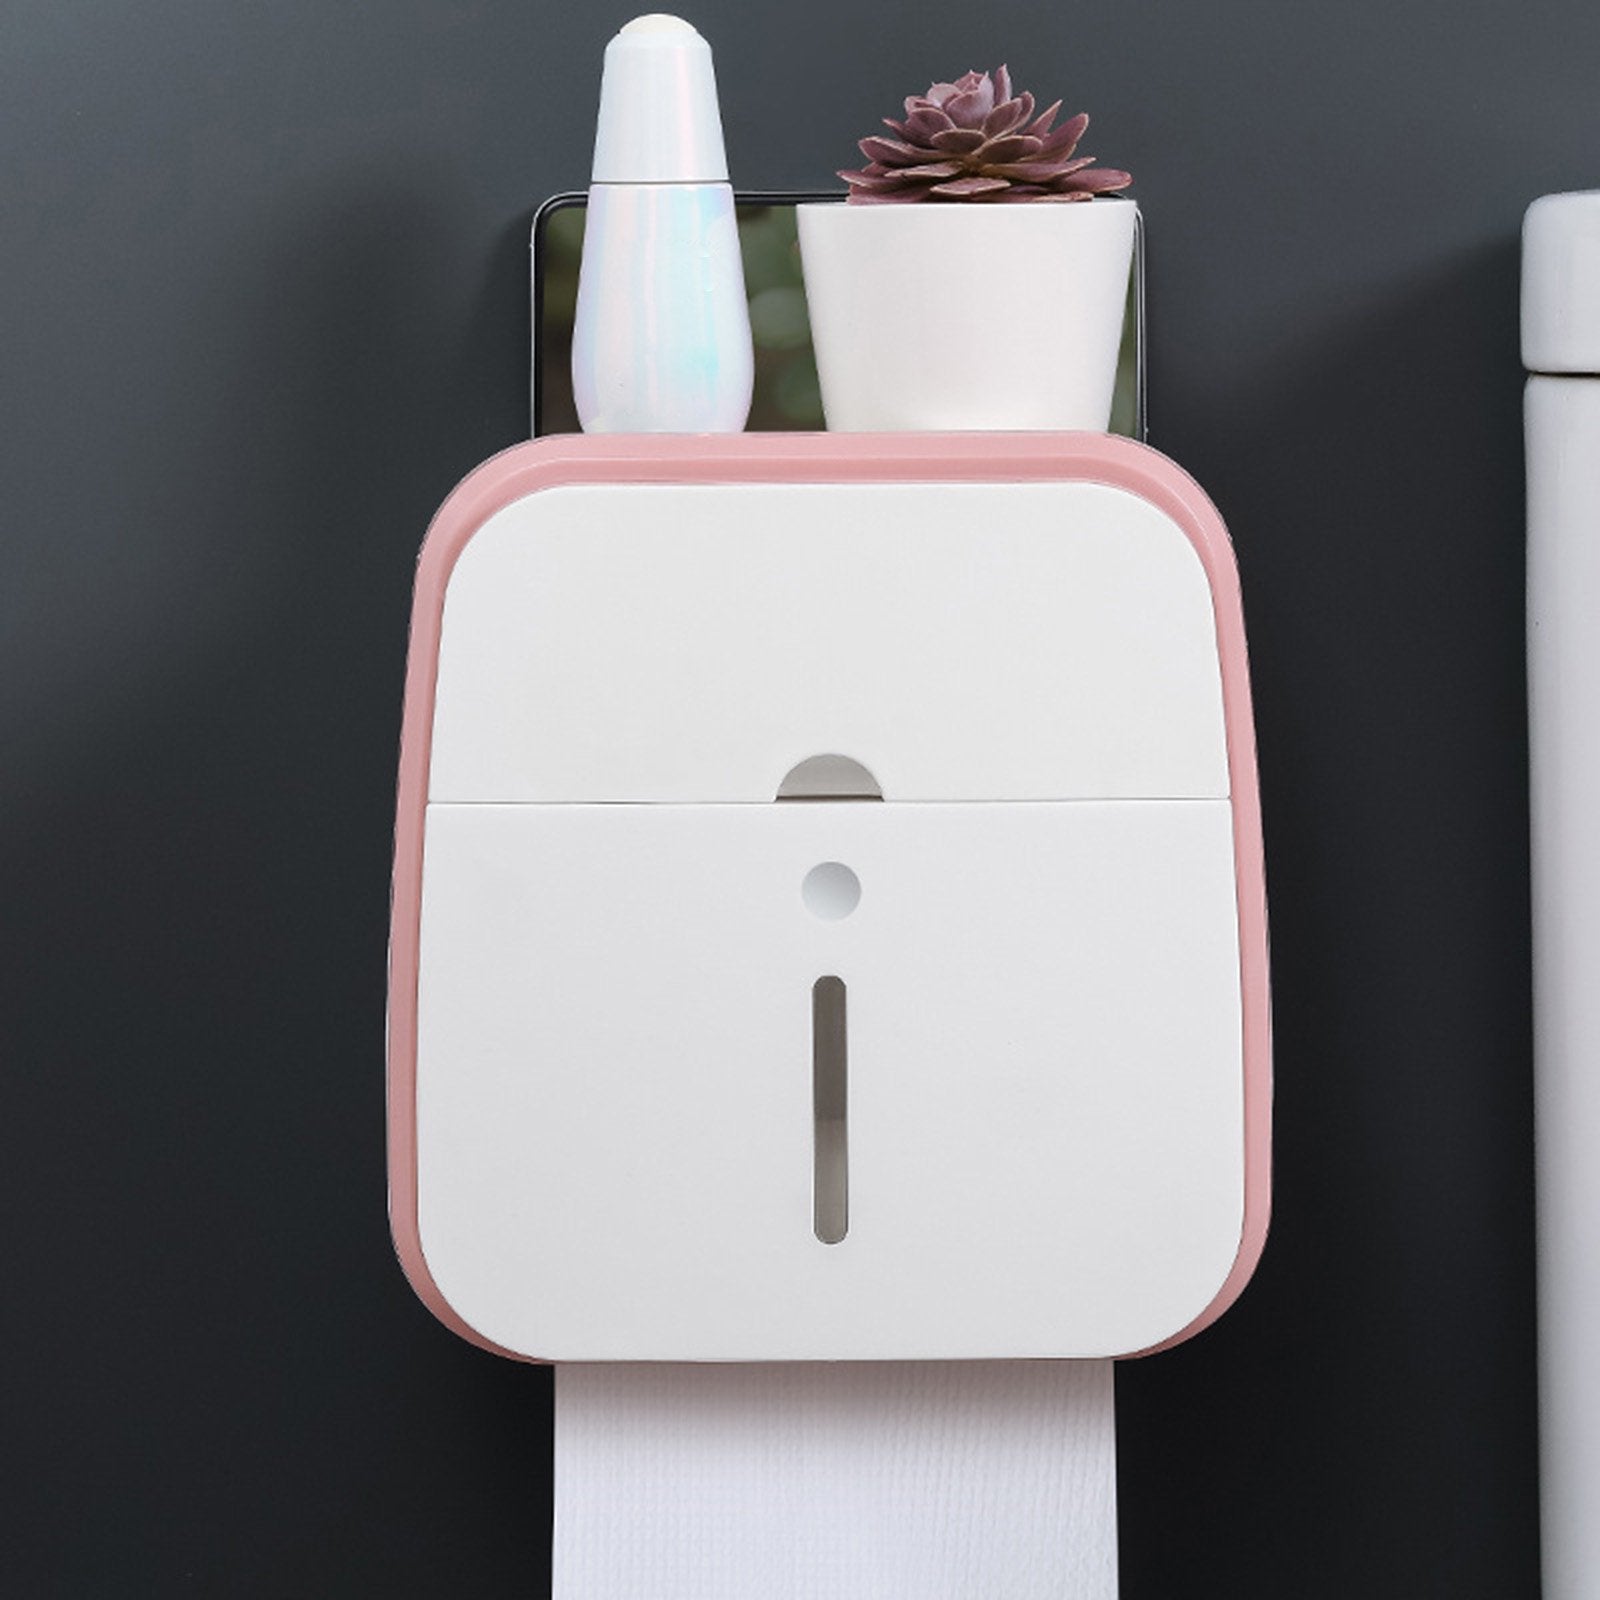 A toilet paper holder within easy reach